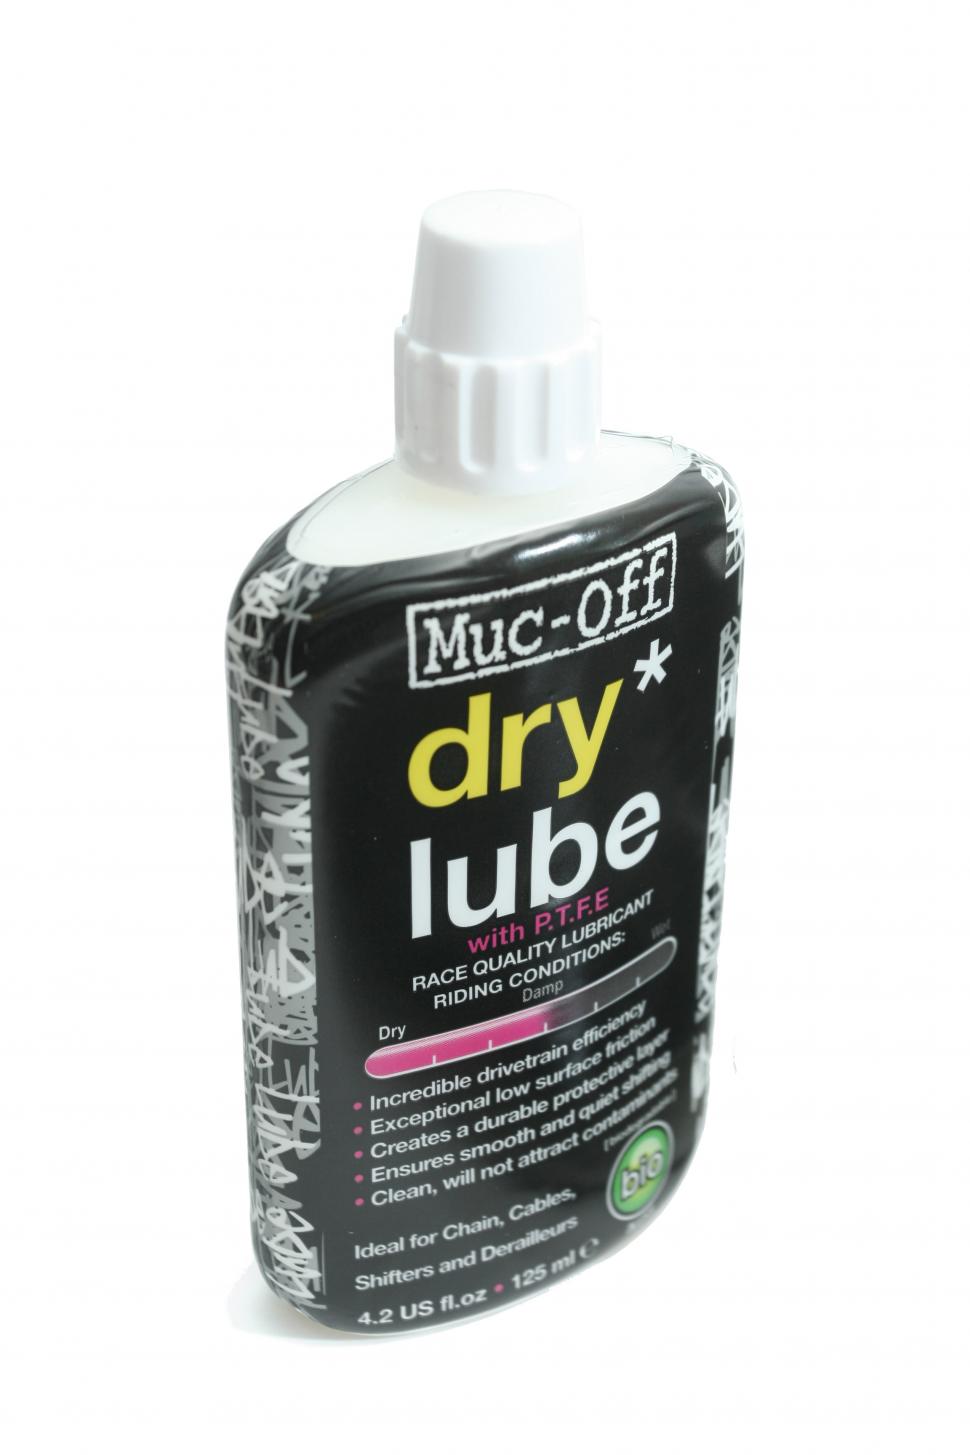 Review: Muc-Off Dry Lube